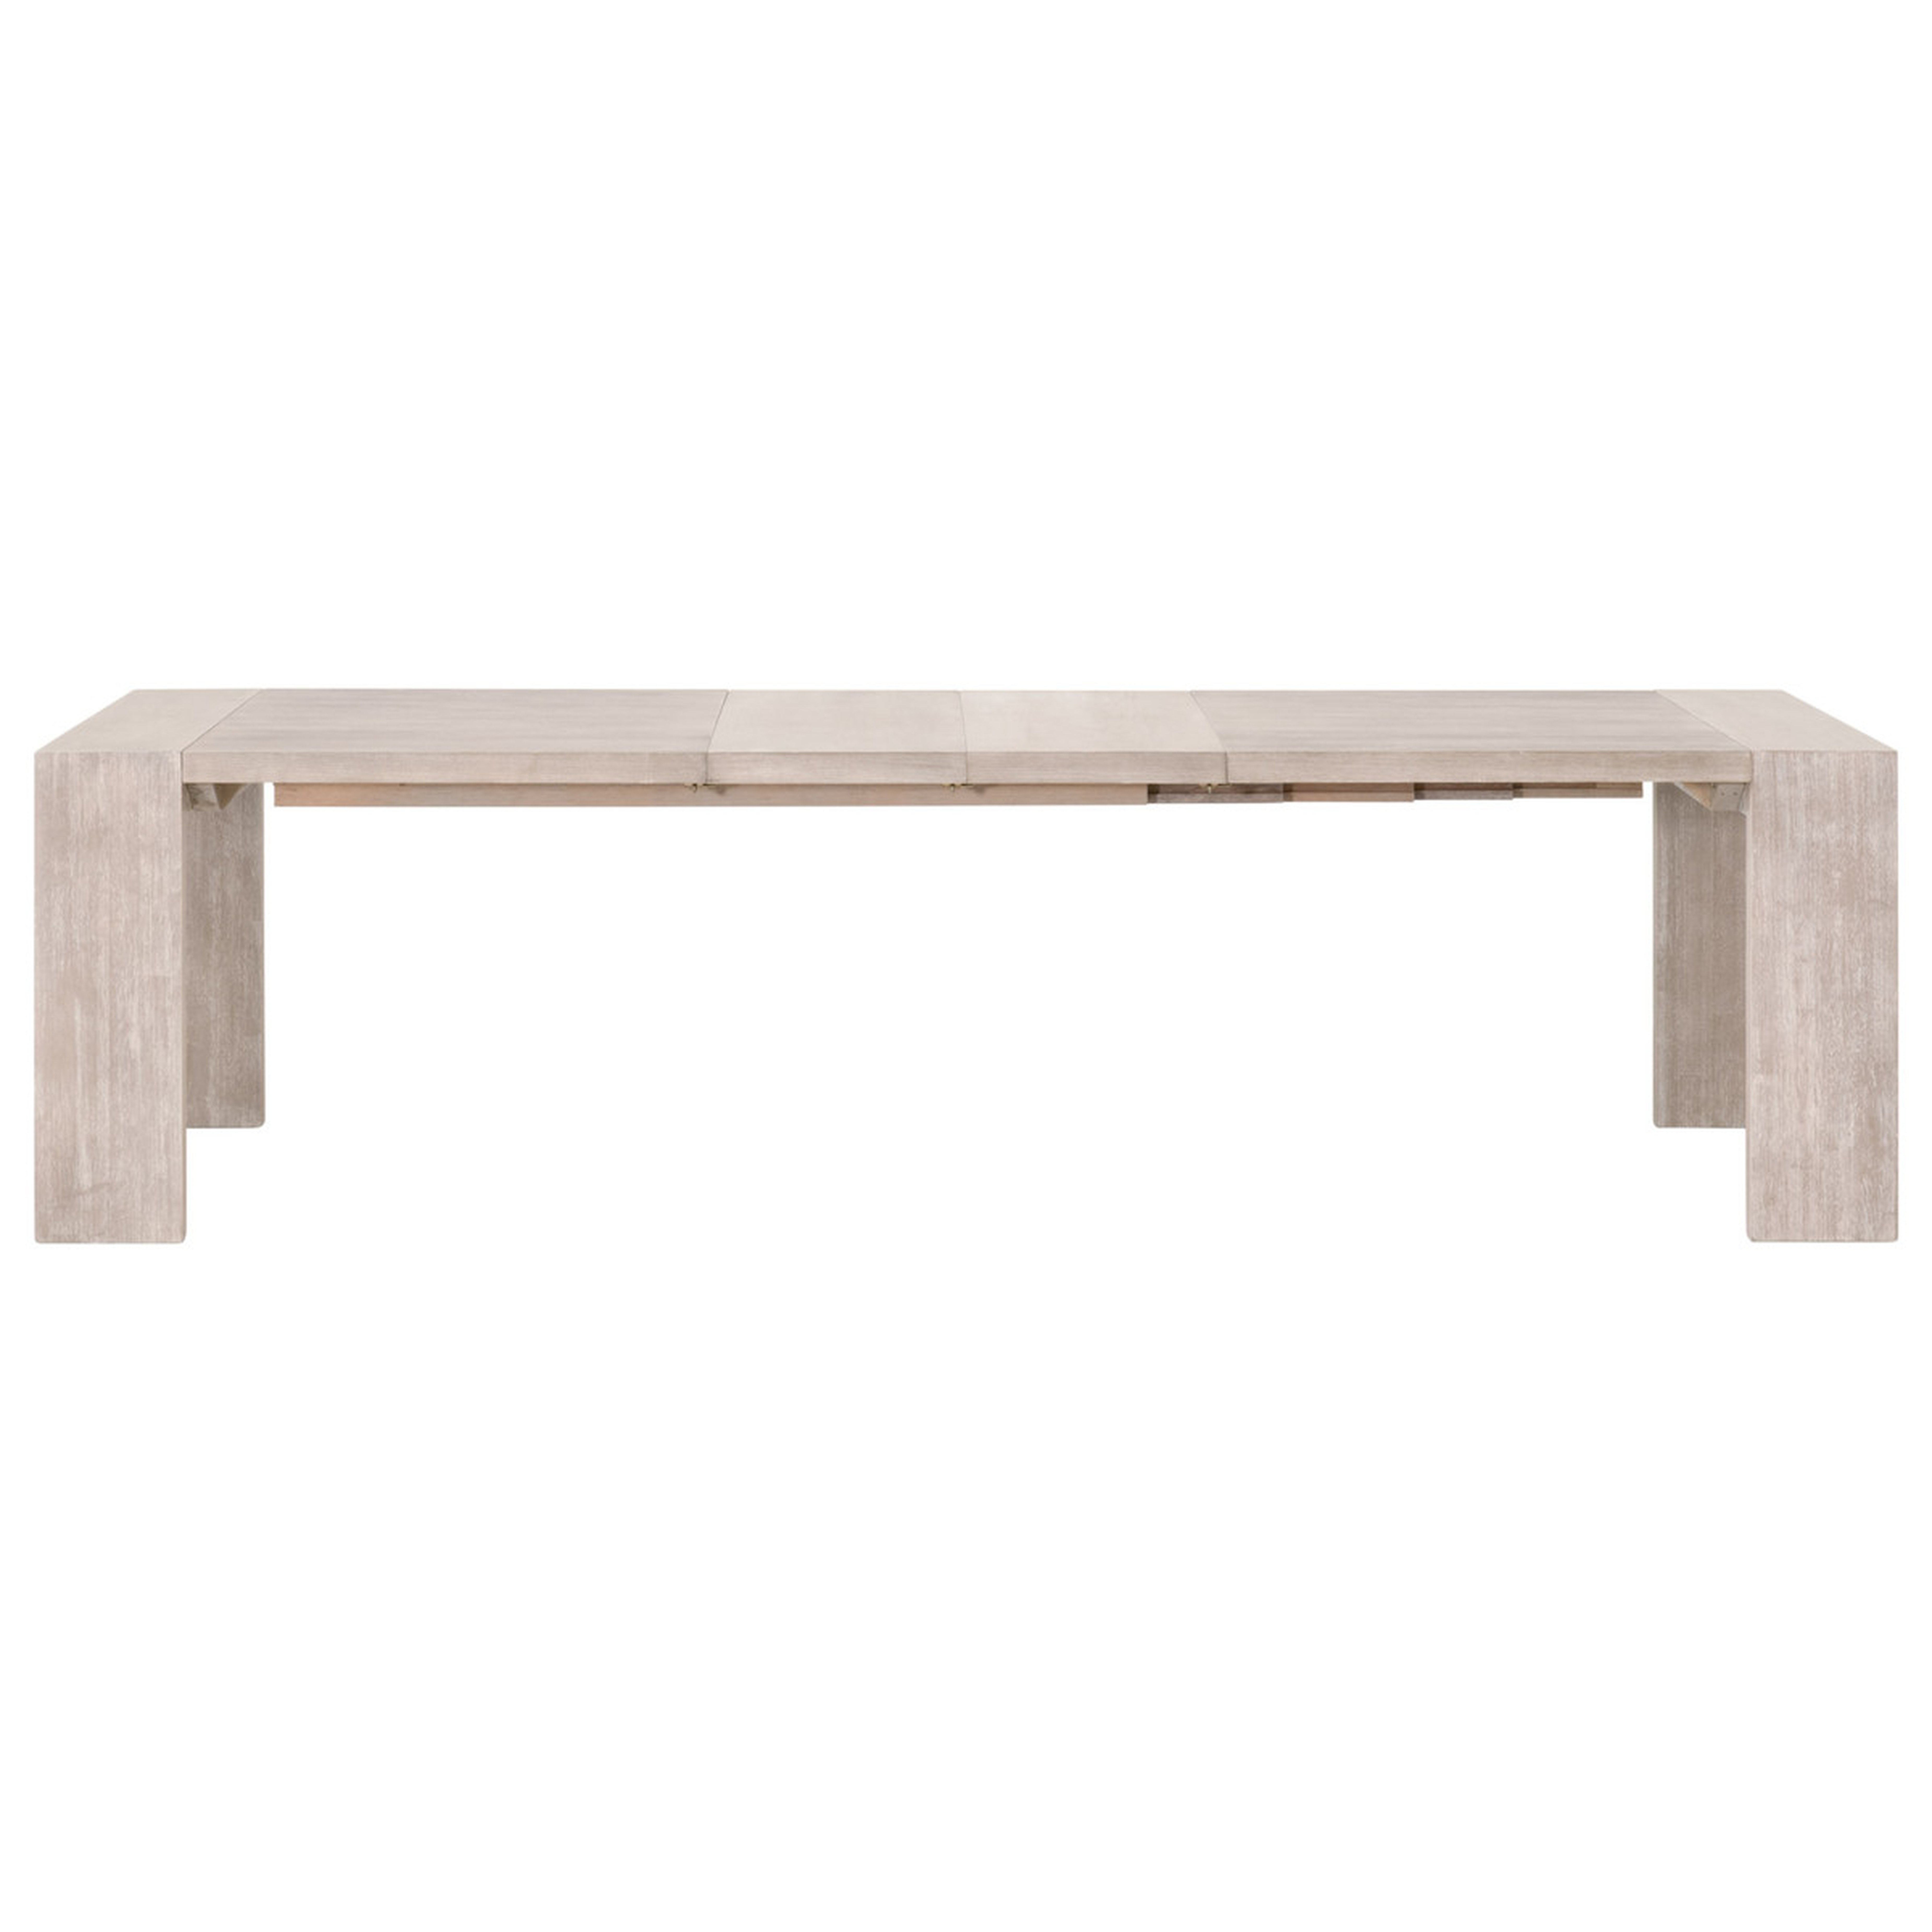 Tropea Extension Dining Table - Alder House